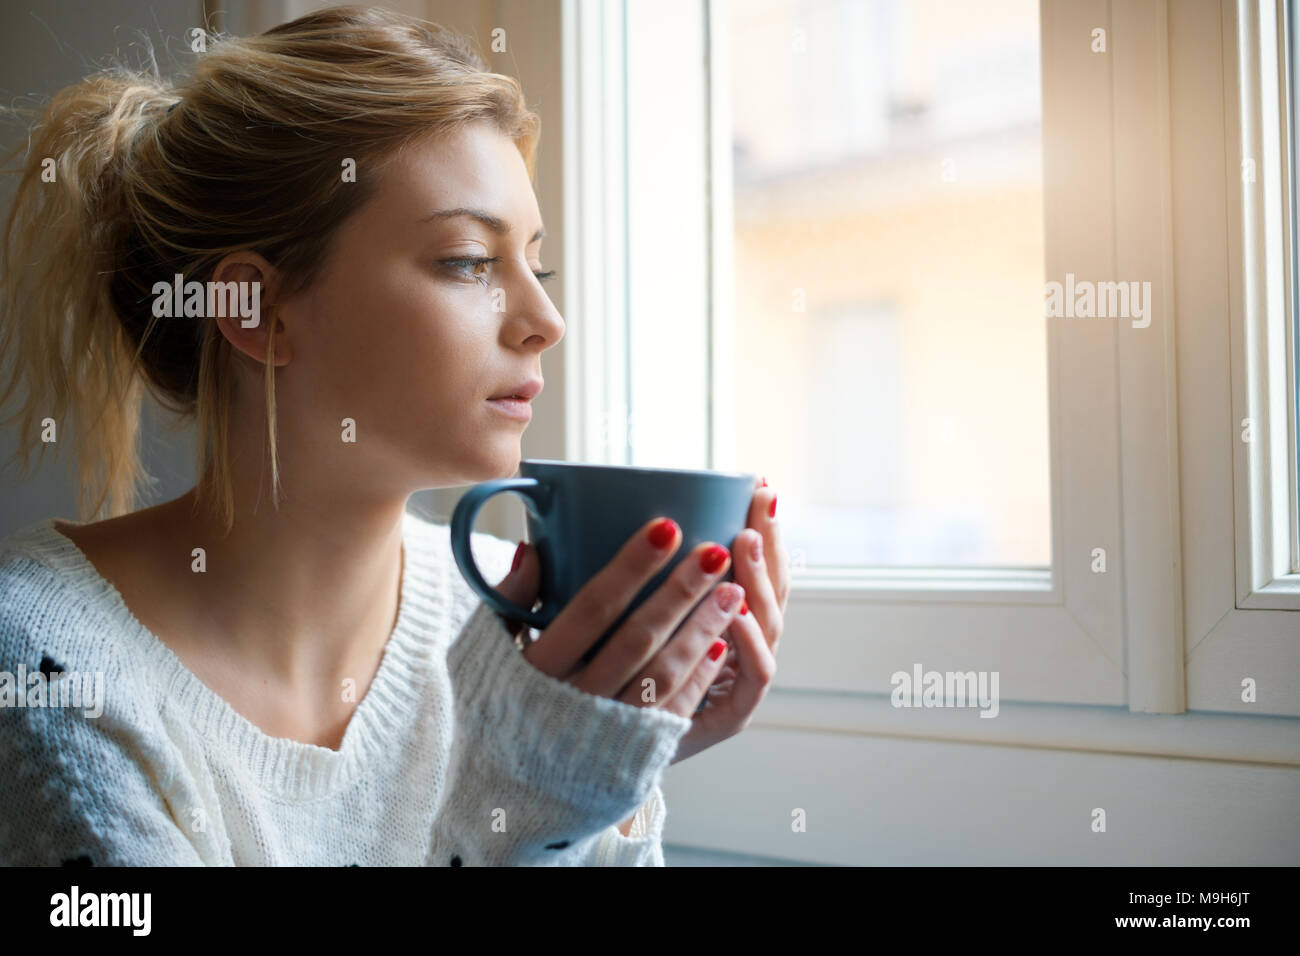 Girl feeling in a bad mood and drinking hot drink Stock Photo